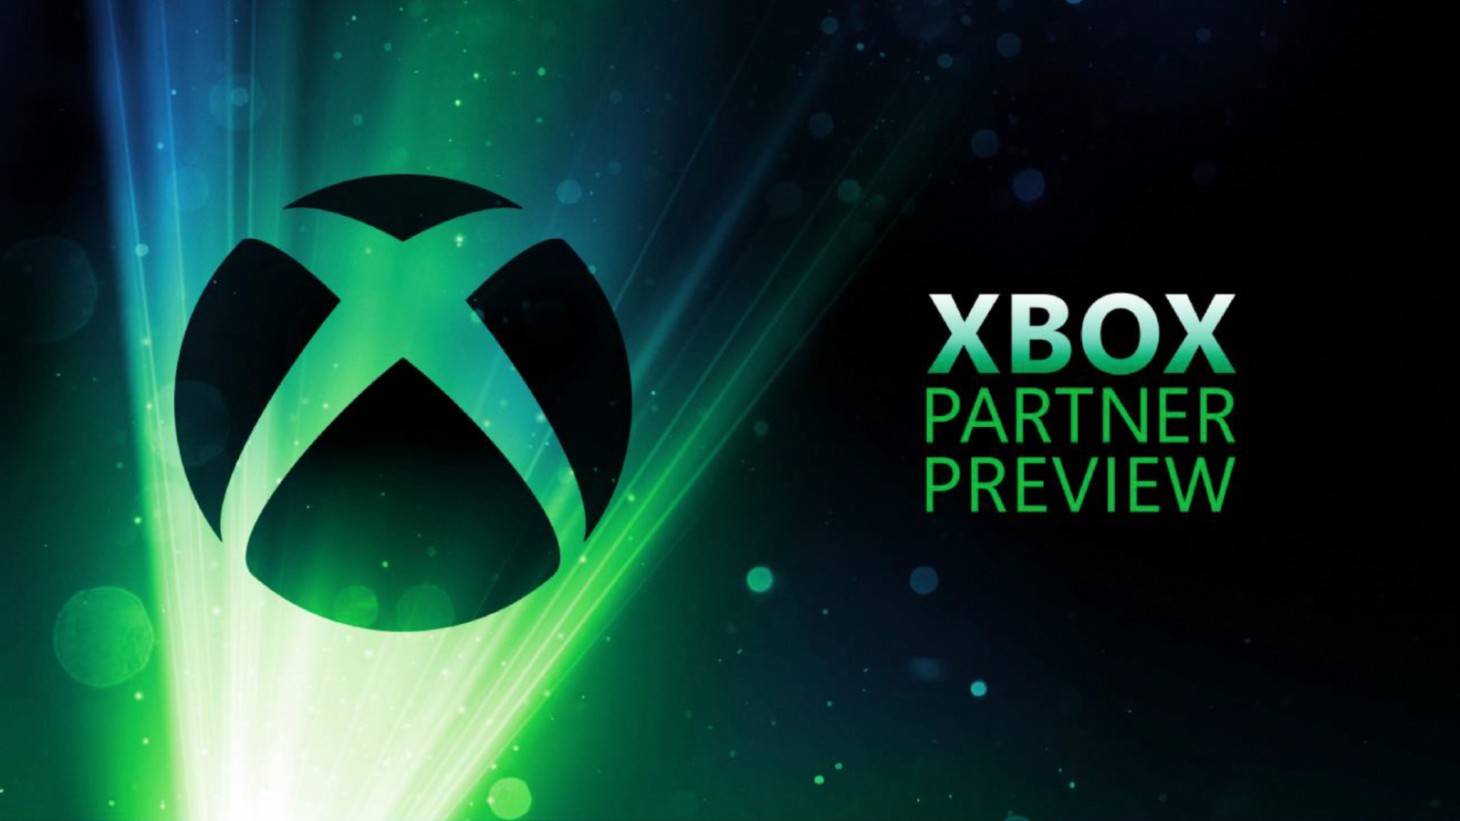 Microsoft Signs 10-Year Partnership to Bring Xbox Games on PC to